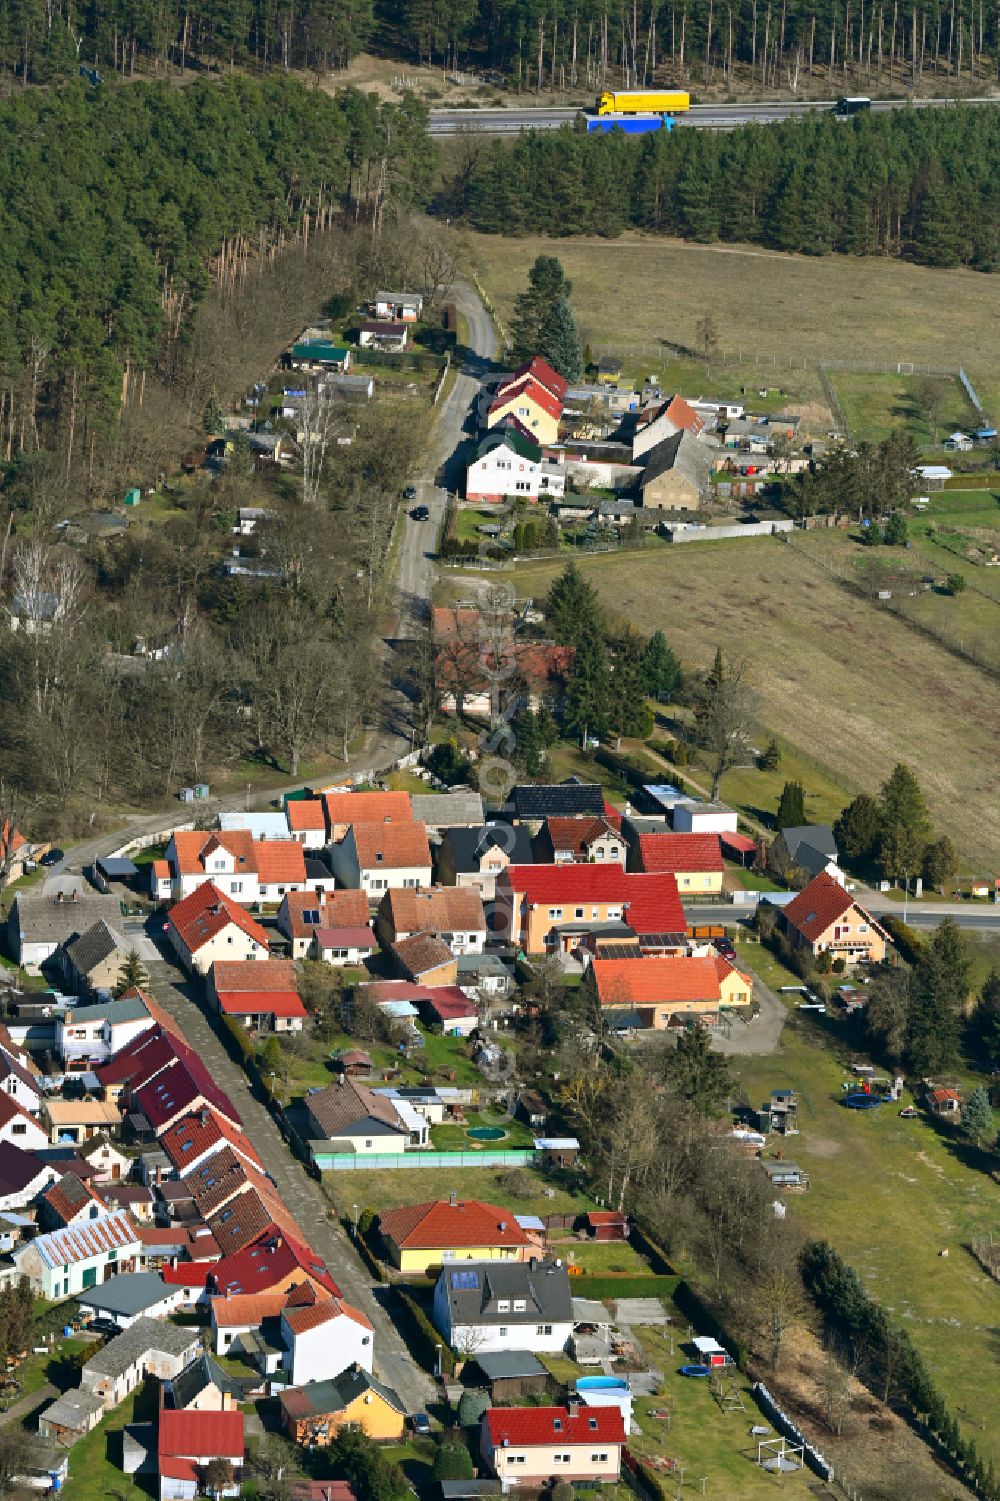 Aerial image Friedrichshof - Agricultural land and field boundaries surround the settlement area of the village in Friedrichshof in the state Brandenburg, Germany